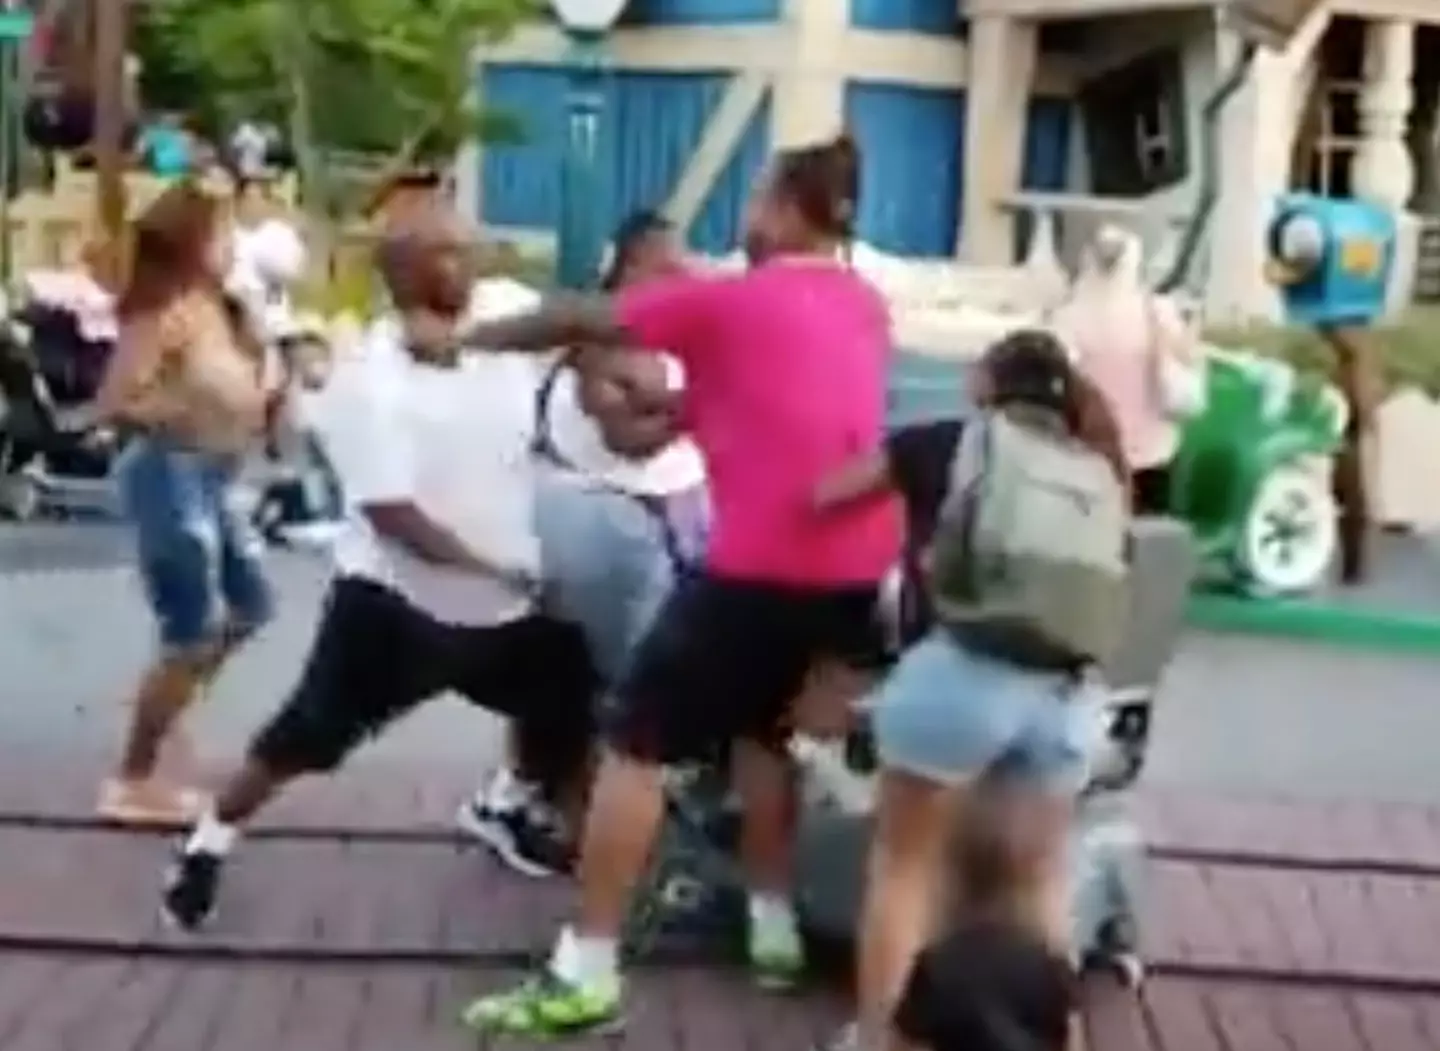 The fight broke out at Disneyland.